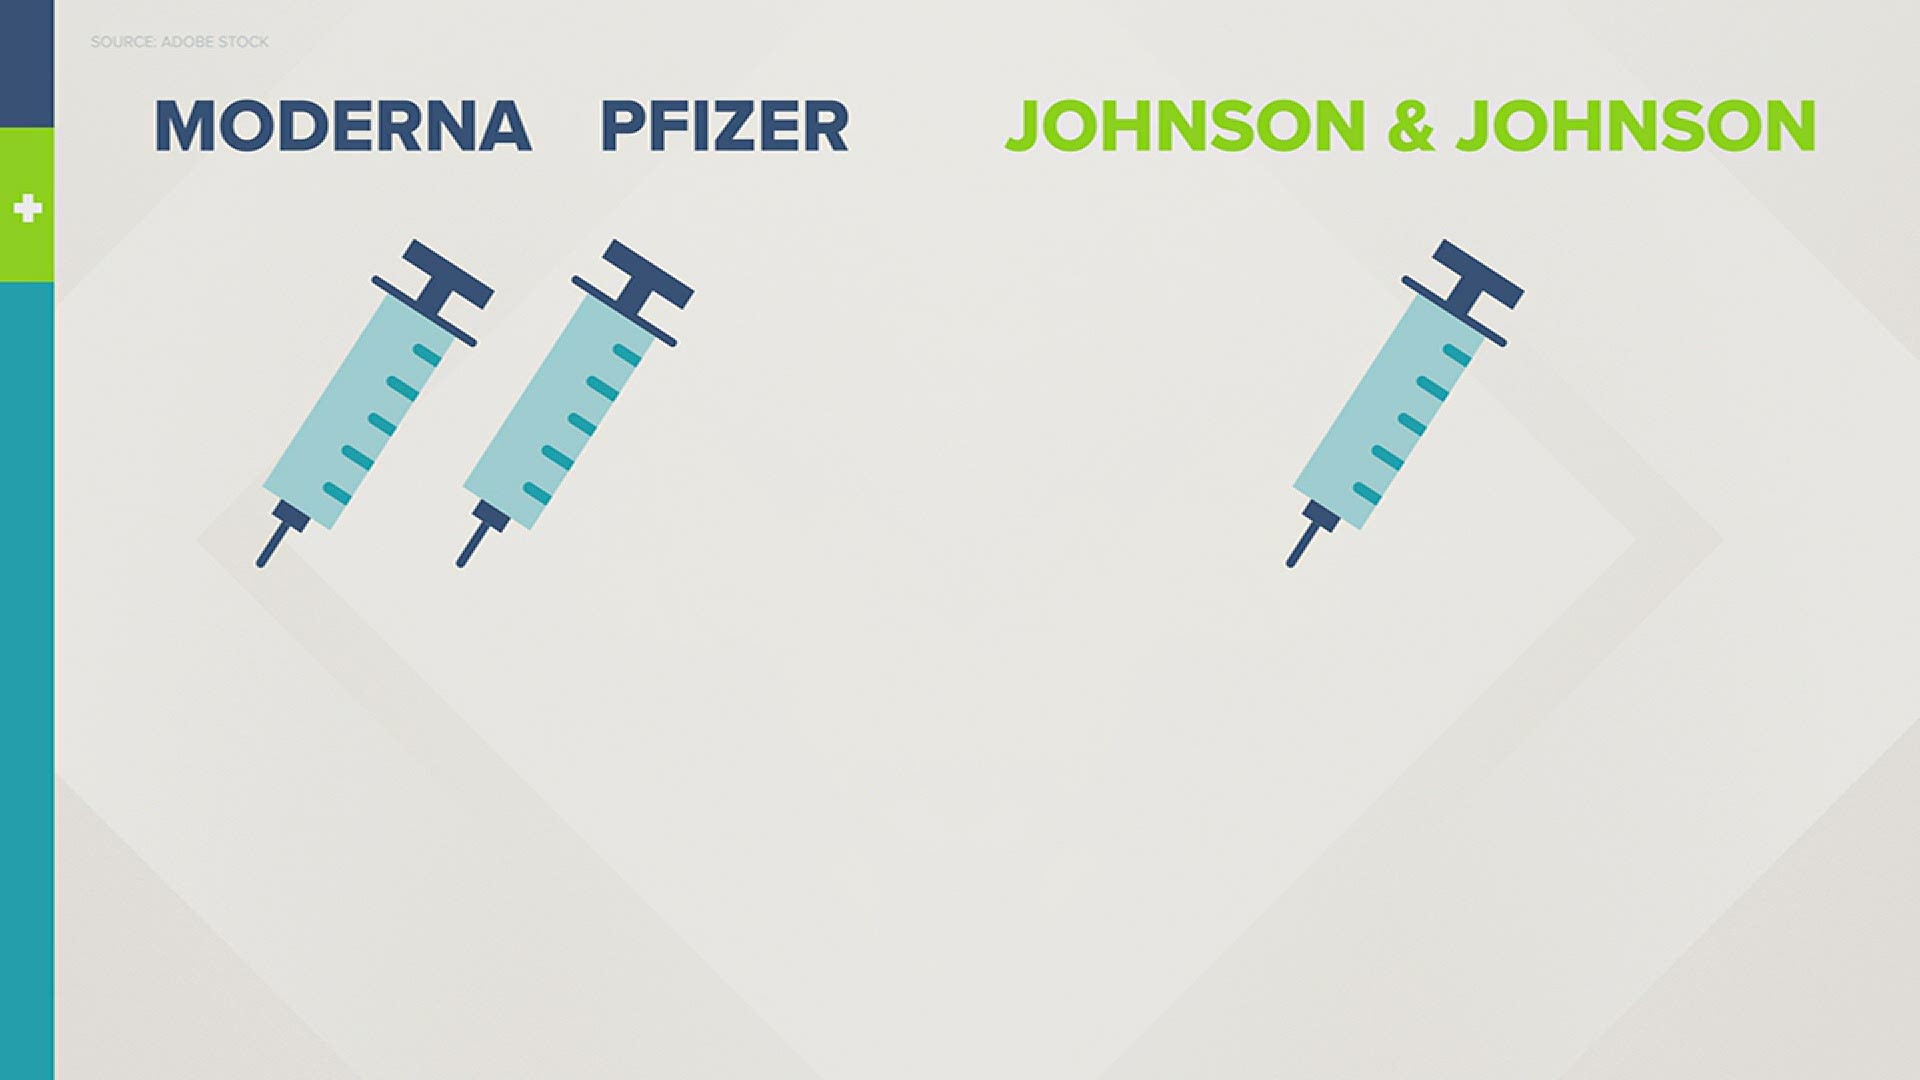 COVID-19 vaccines from Pfizer, Moderna and Johnson & Johnson will all help prevent illness from the virus, but here's how they're different.